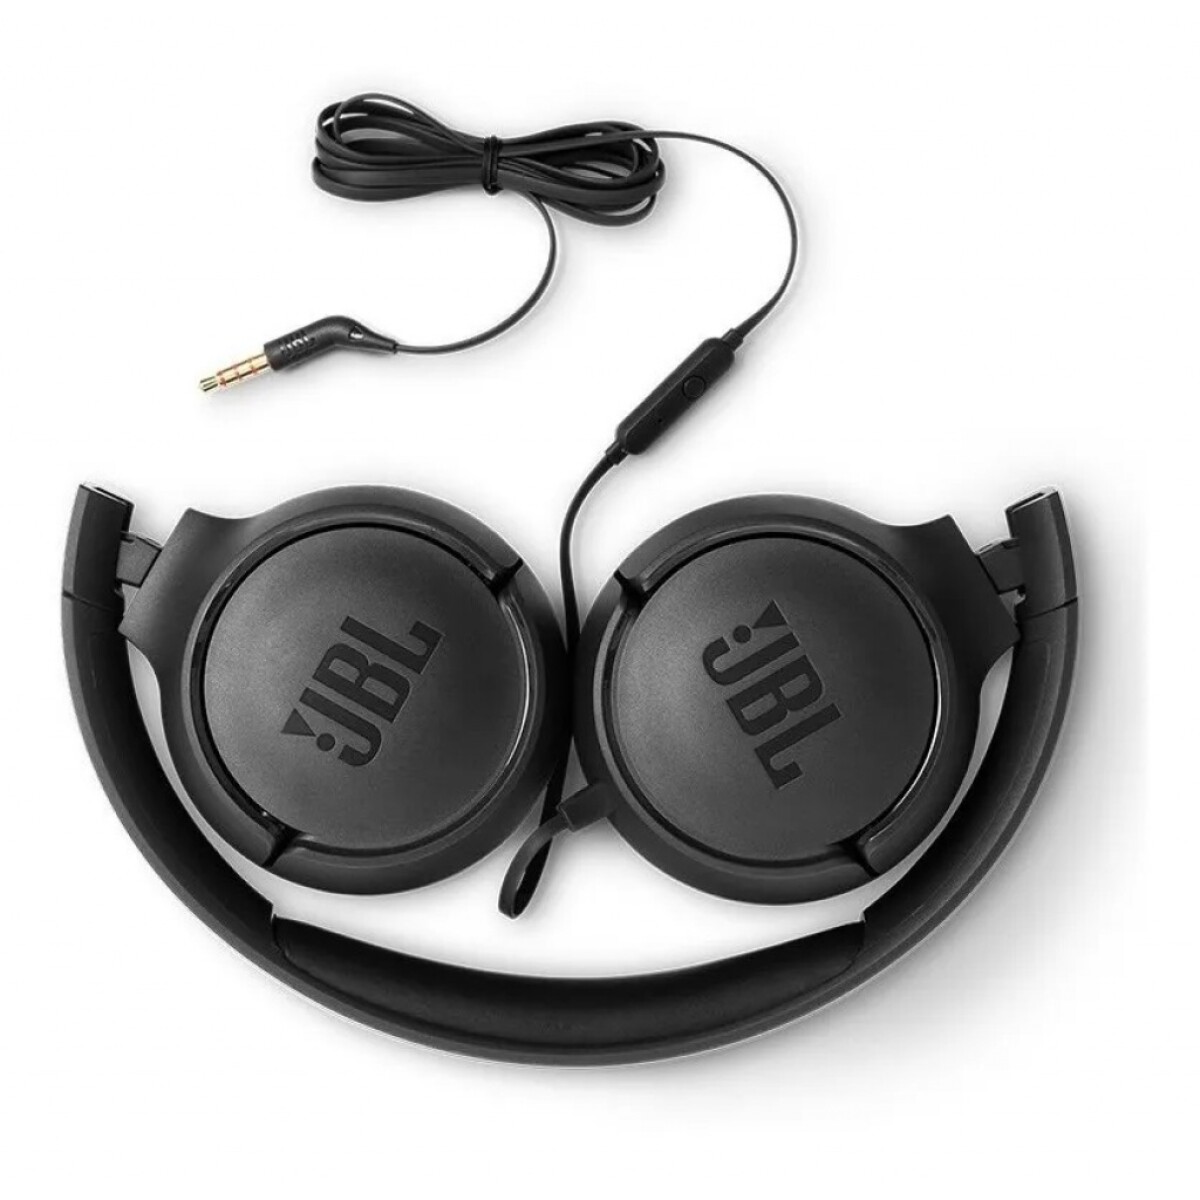 AURICULARES JBL T500 CON CABLE NEGROS 